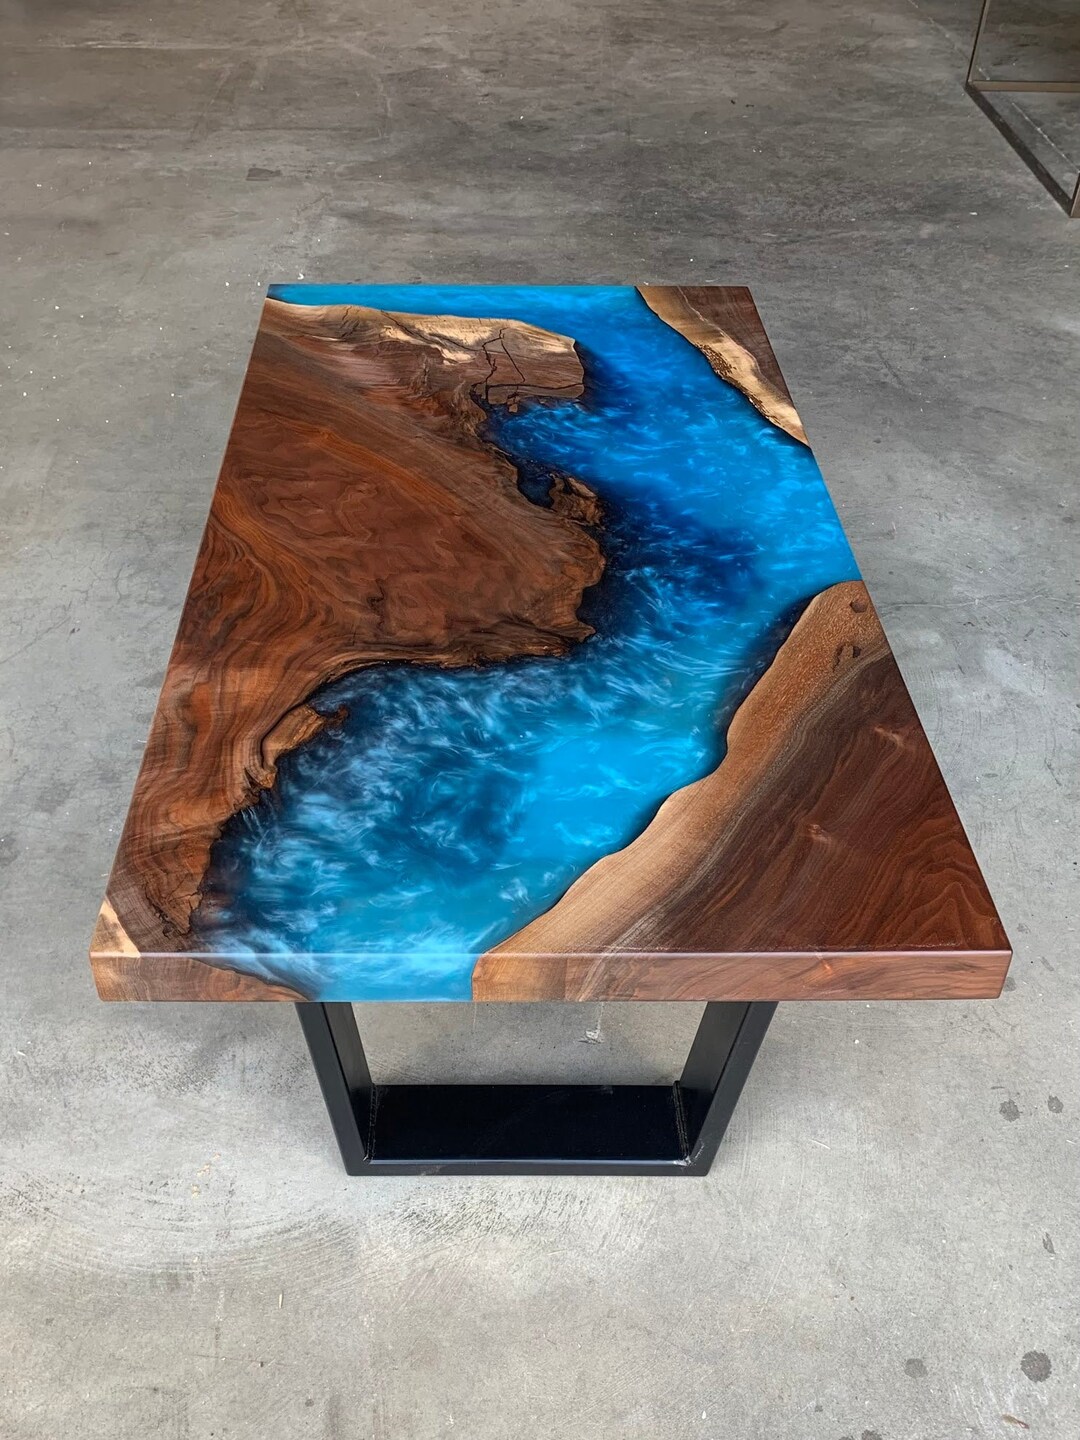 Black Walnut Rounds and Solid Black Epoxy Coffee Table – WoodLab